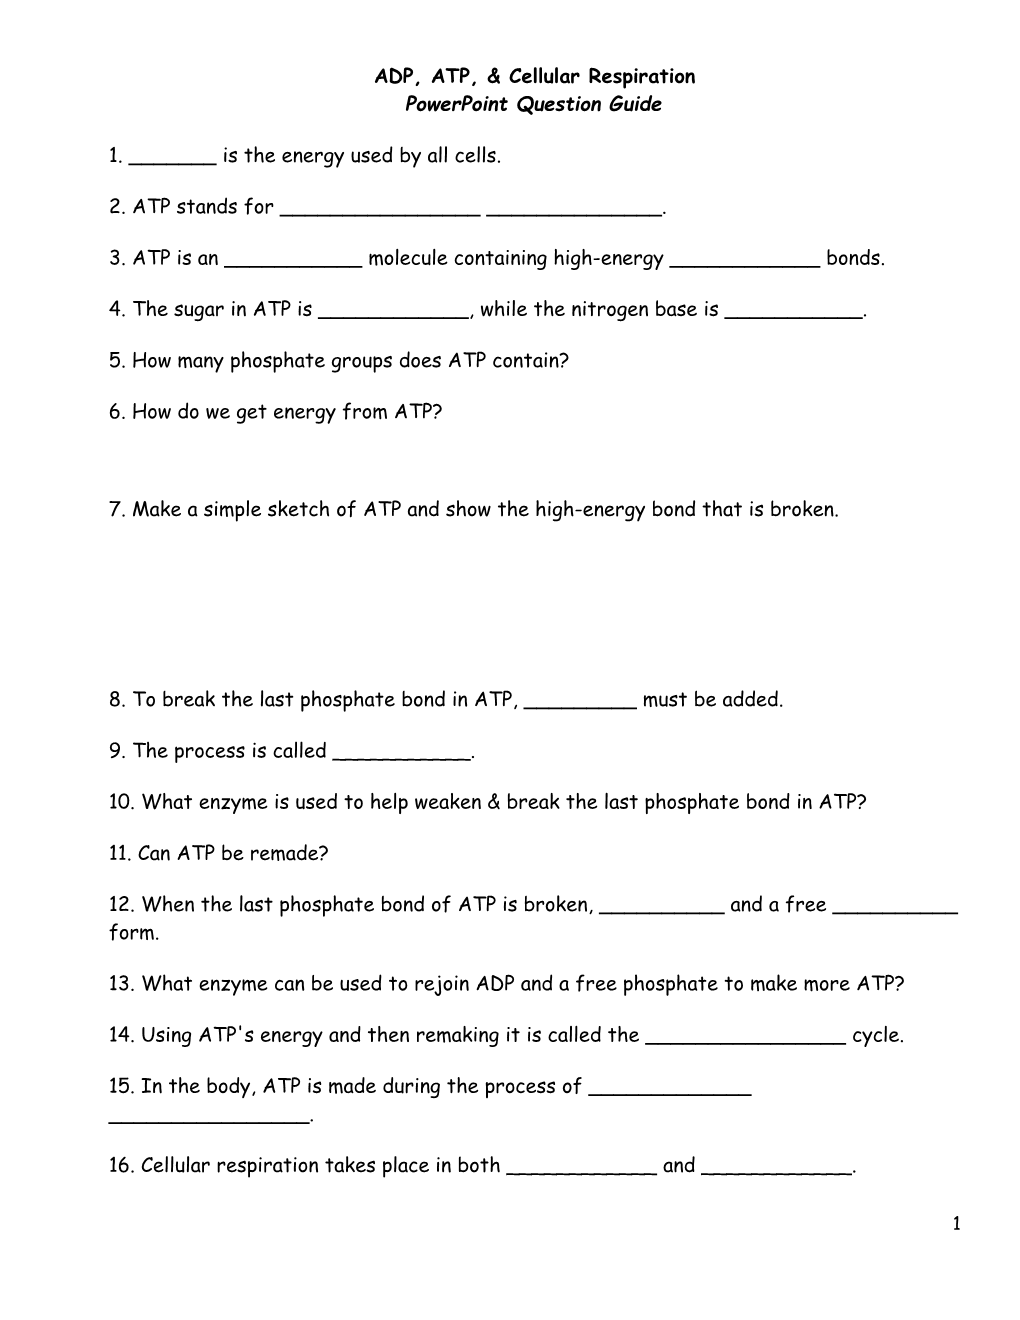 ADP, ATP, & Cellular Respiration Powerpoint Question Guide